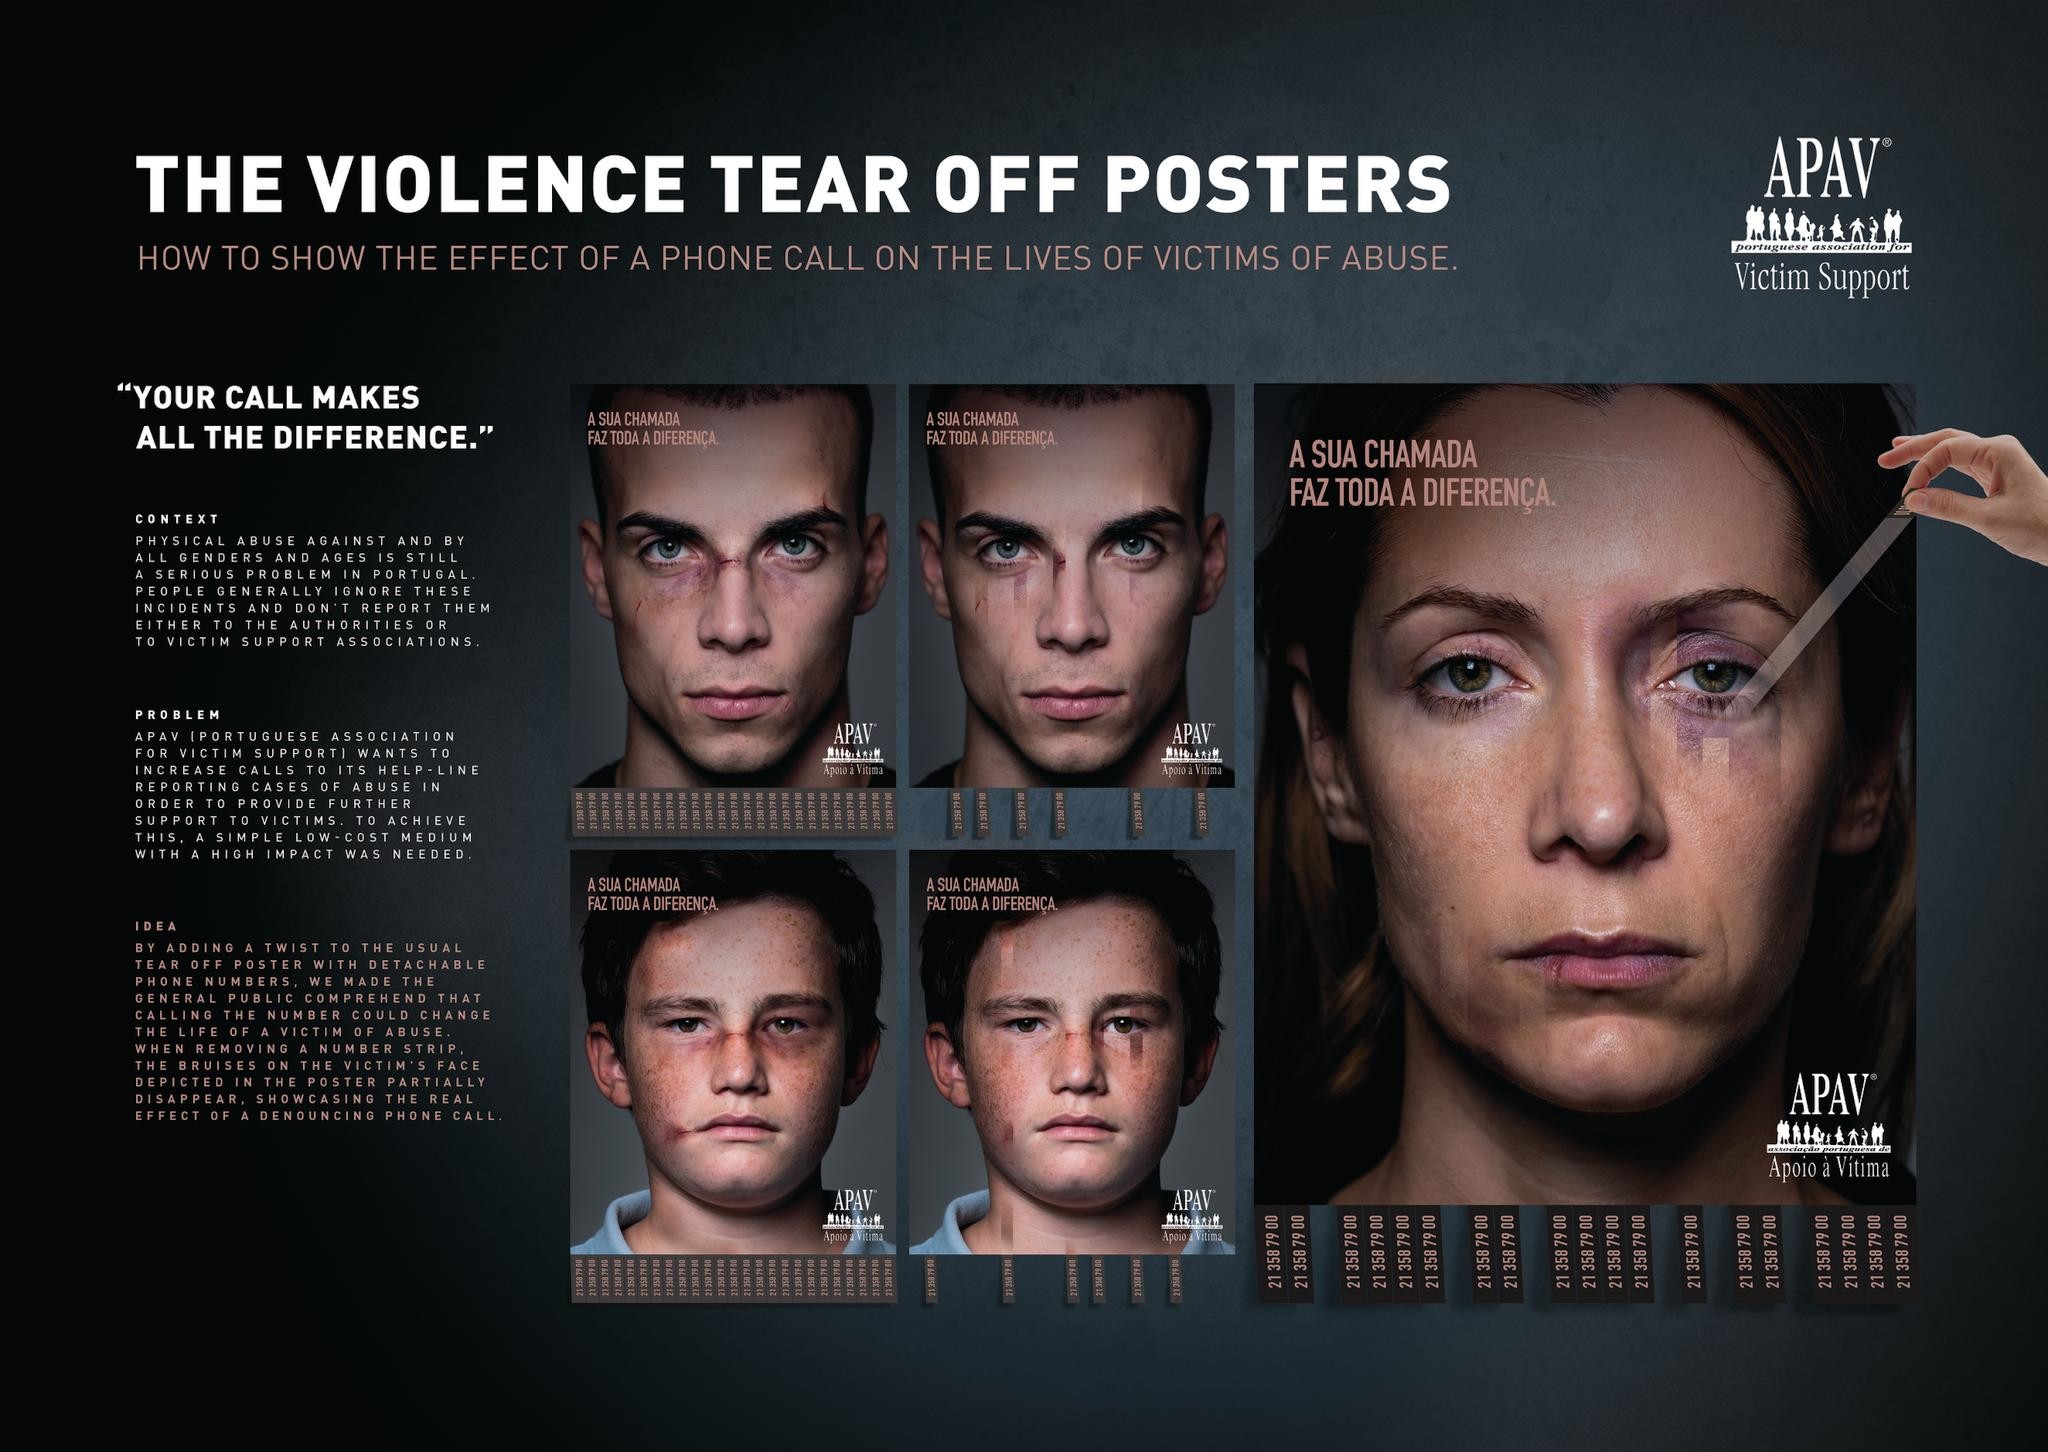 THE VIOLENCE TEAR OFF POSTERS